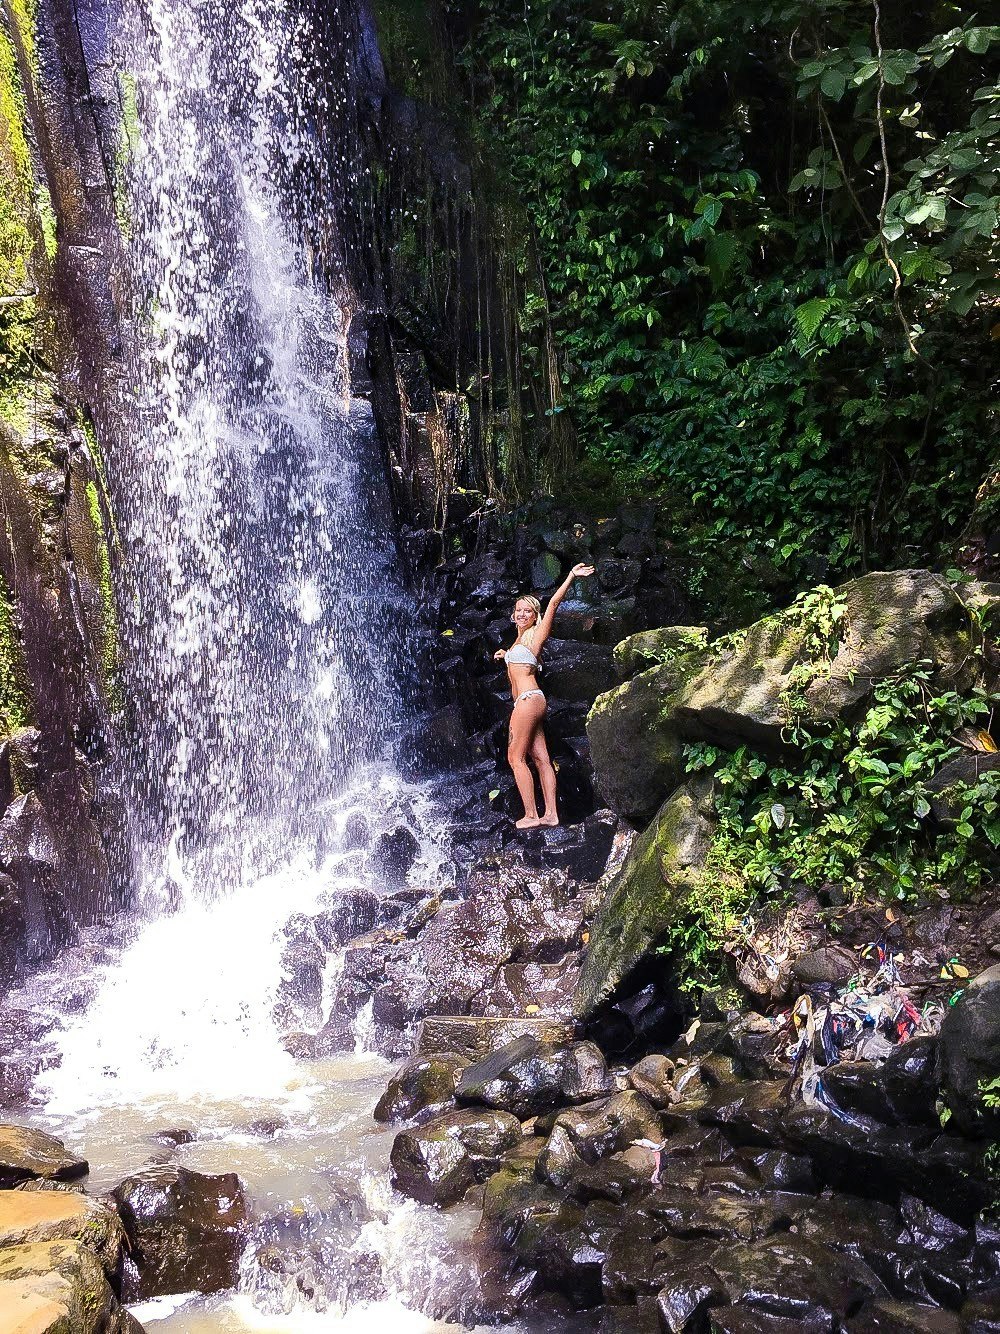 Fabiana stands beneath a waterfall in a white swimsuit.